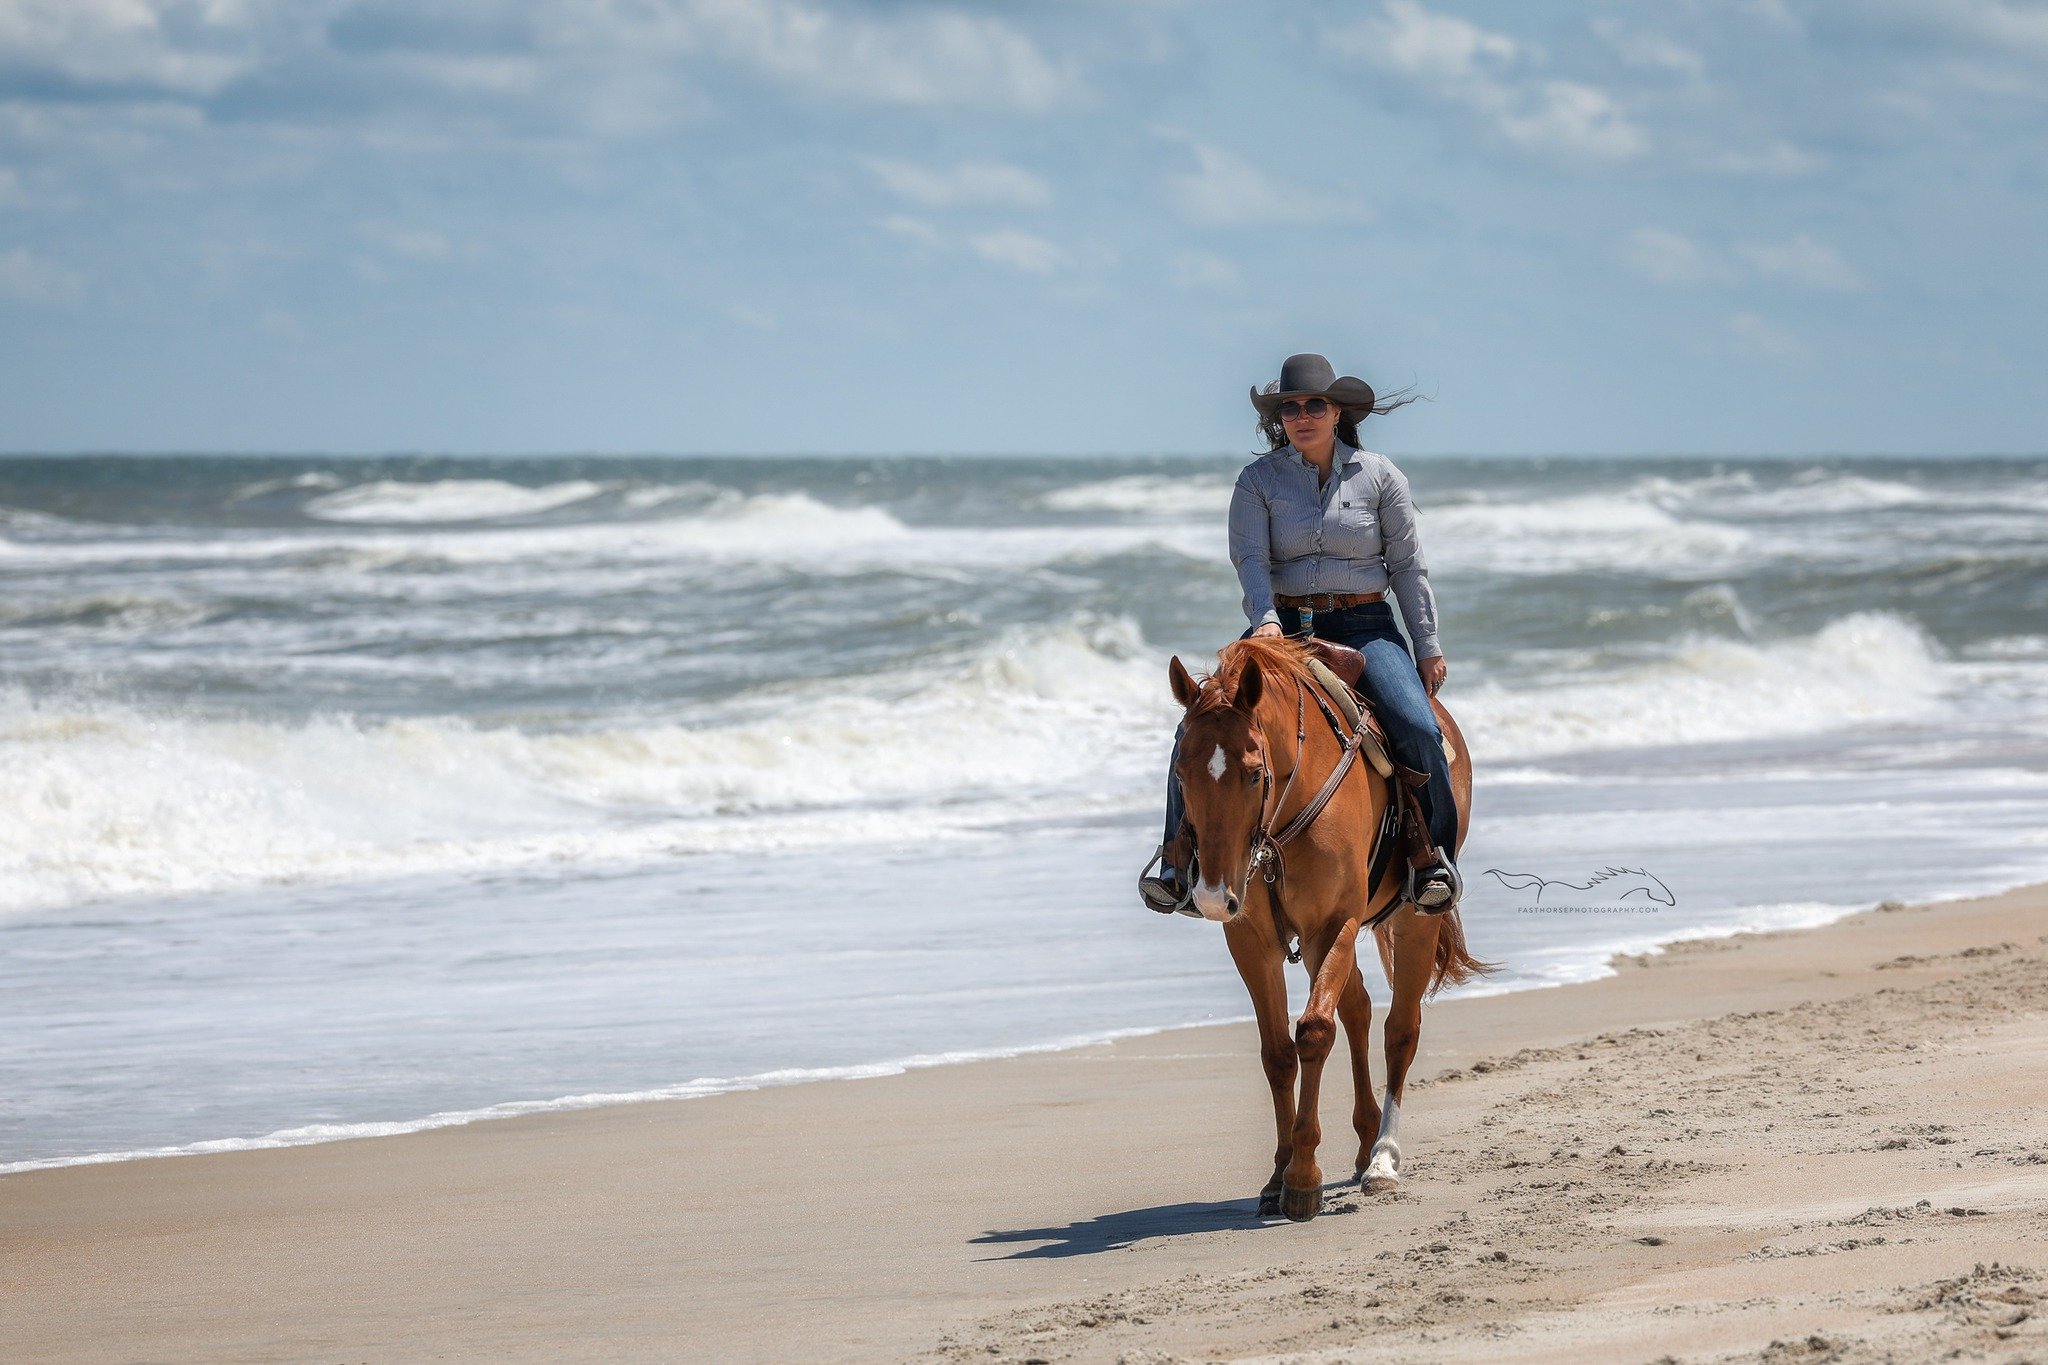 Shoot on the beach at 2:00 pm? Sure! This was the prettiest day we could have hoped for. Beautiful cool breezy weather. The waves were crashing and the sand was blowing and the horses were as sweet as could be. I loved getting to photograph horses at